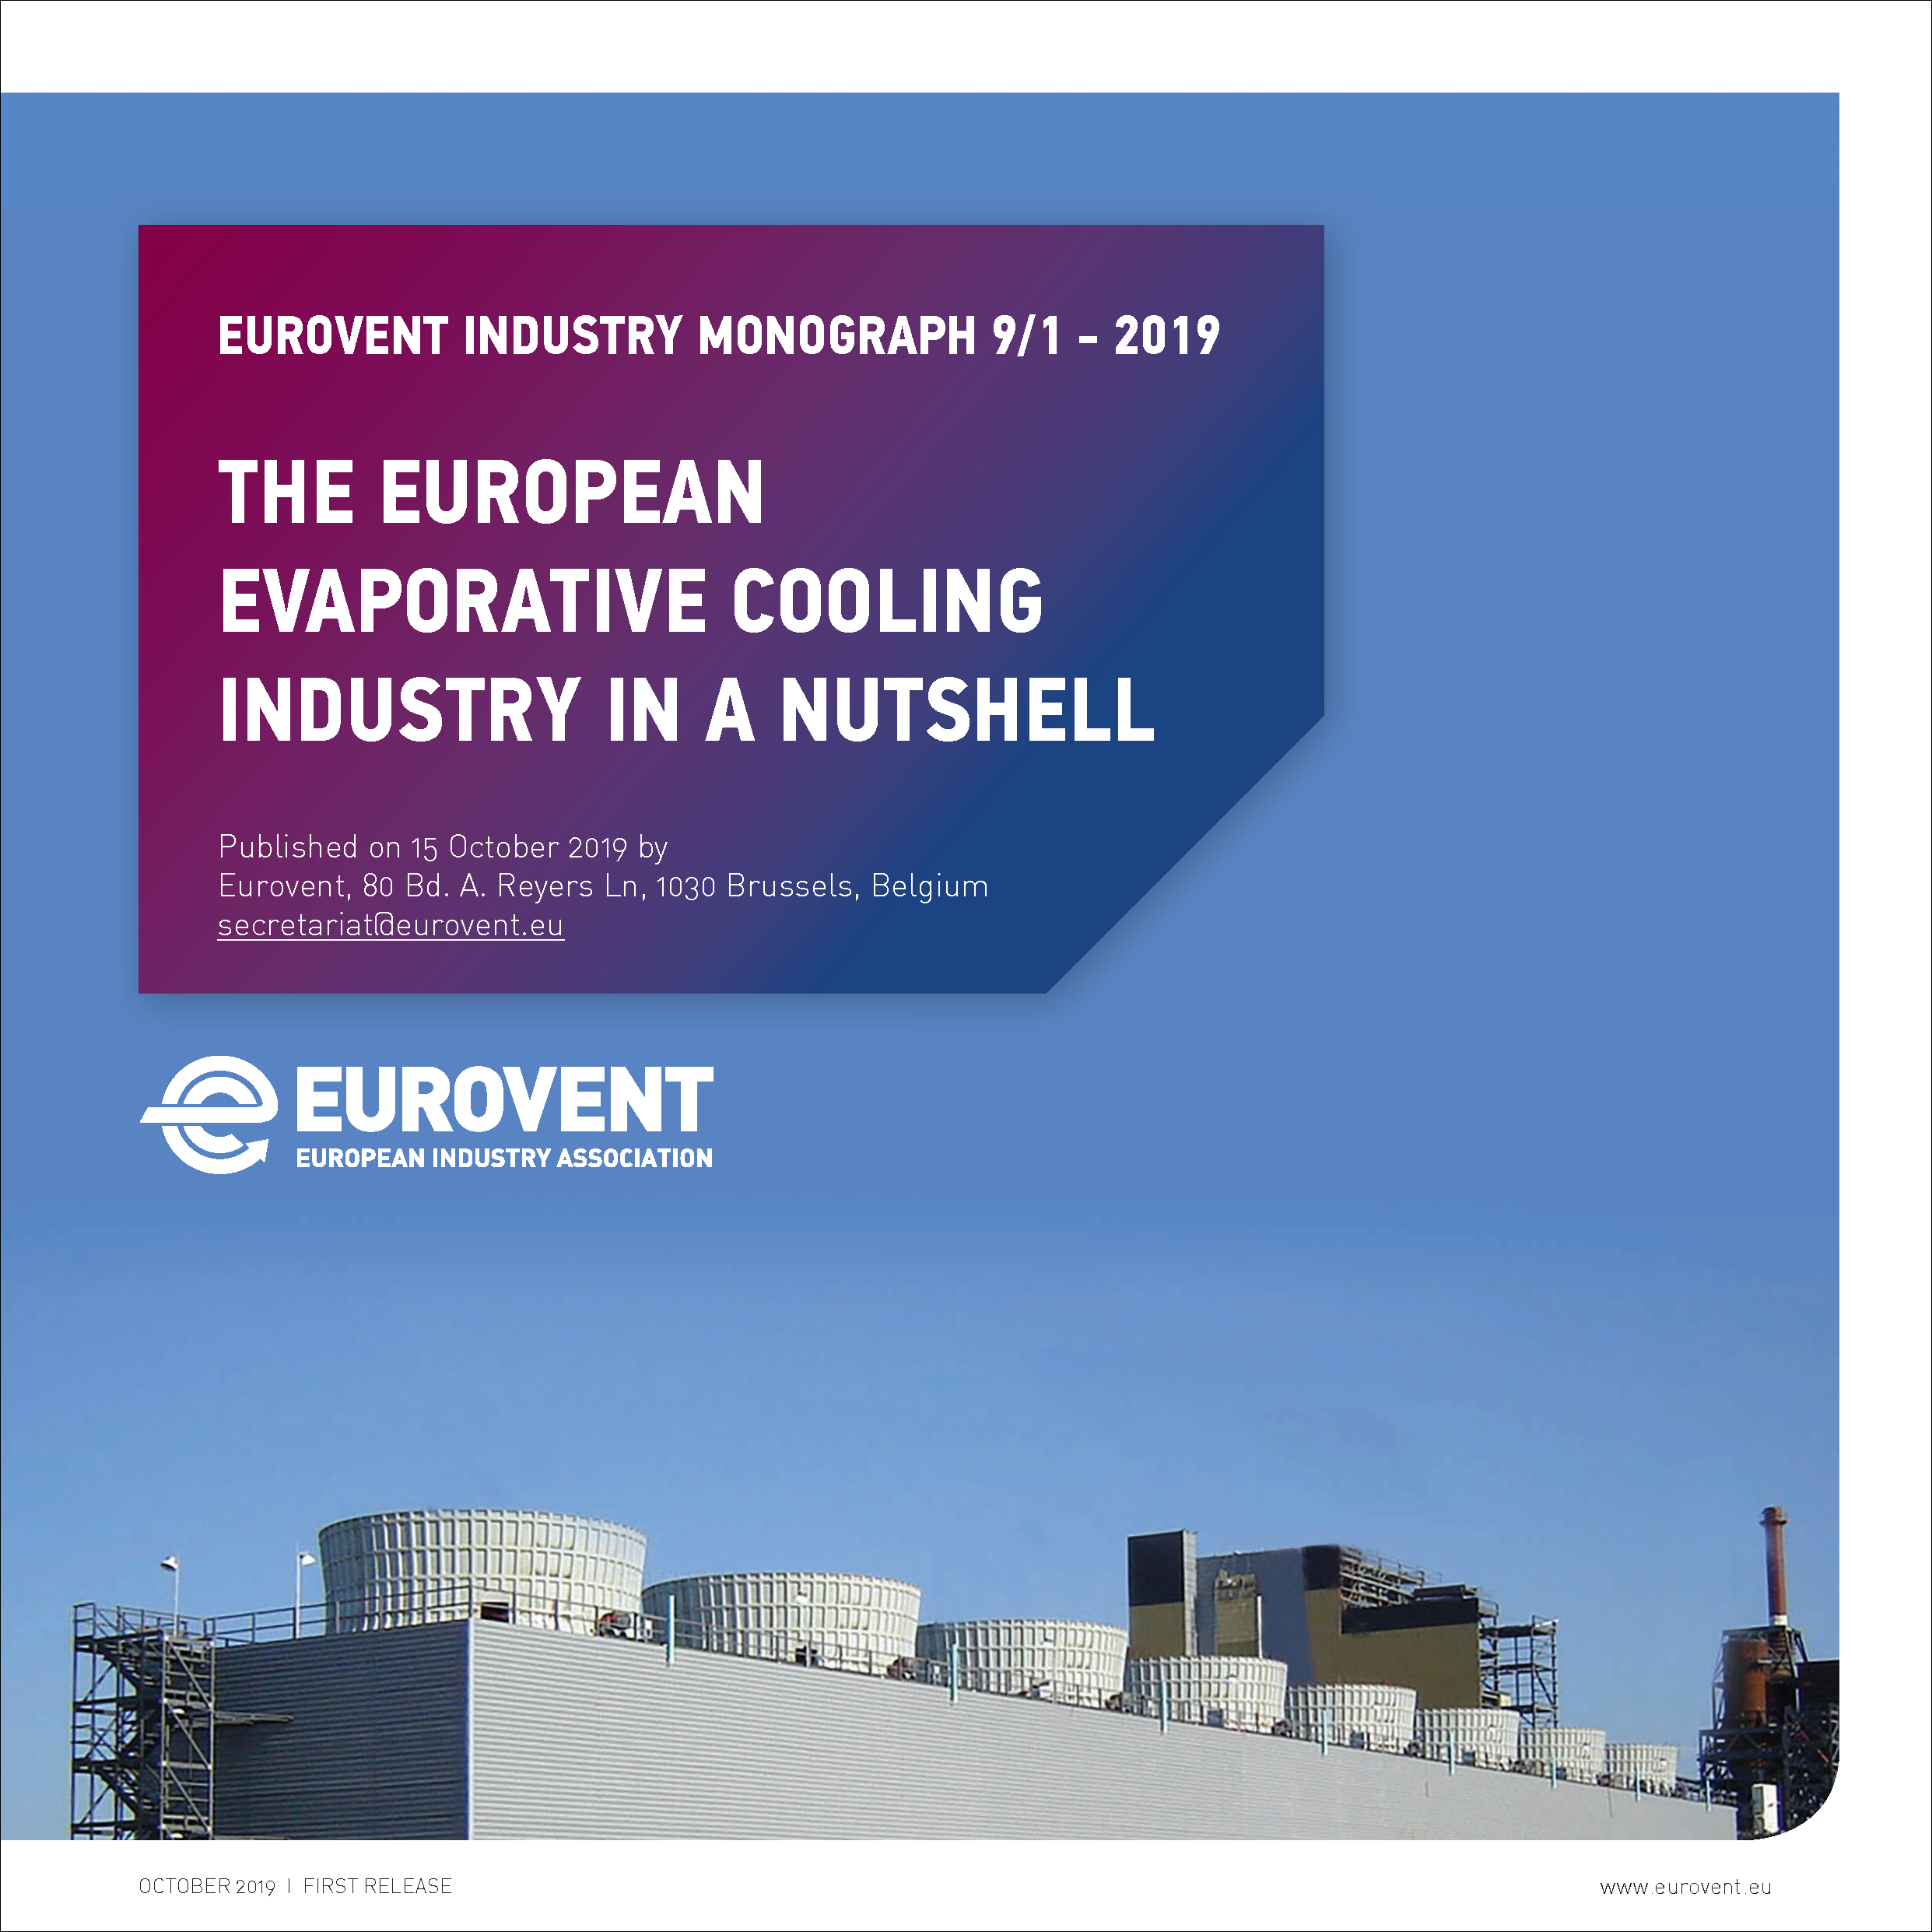 Eurovent Industry Monograph 9/1 - 2019: The European Evaporative Cooling industry in a nutshell - English